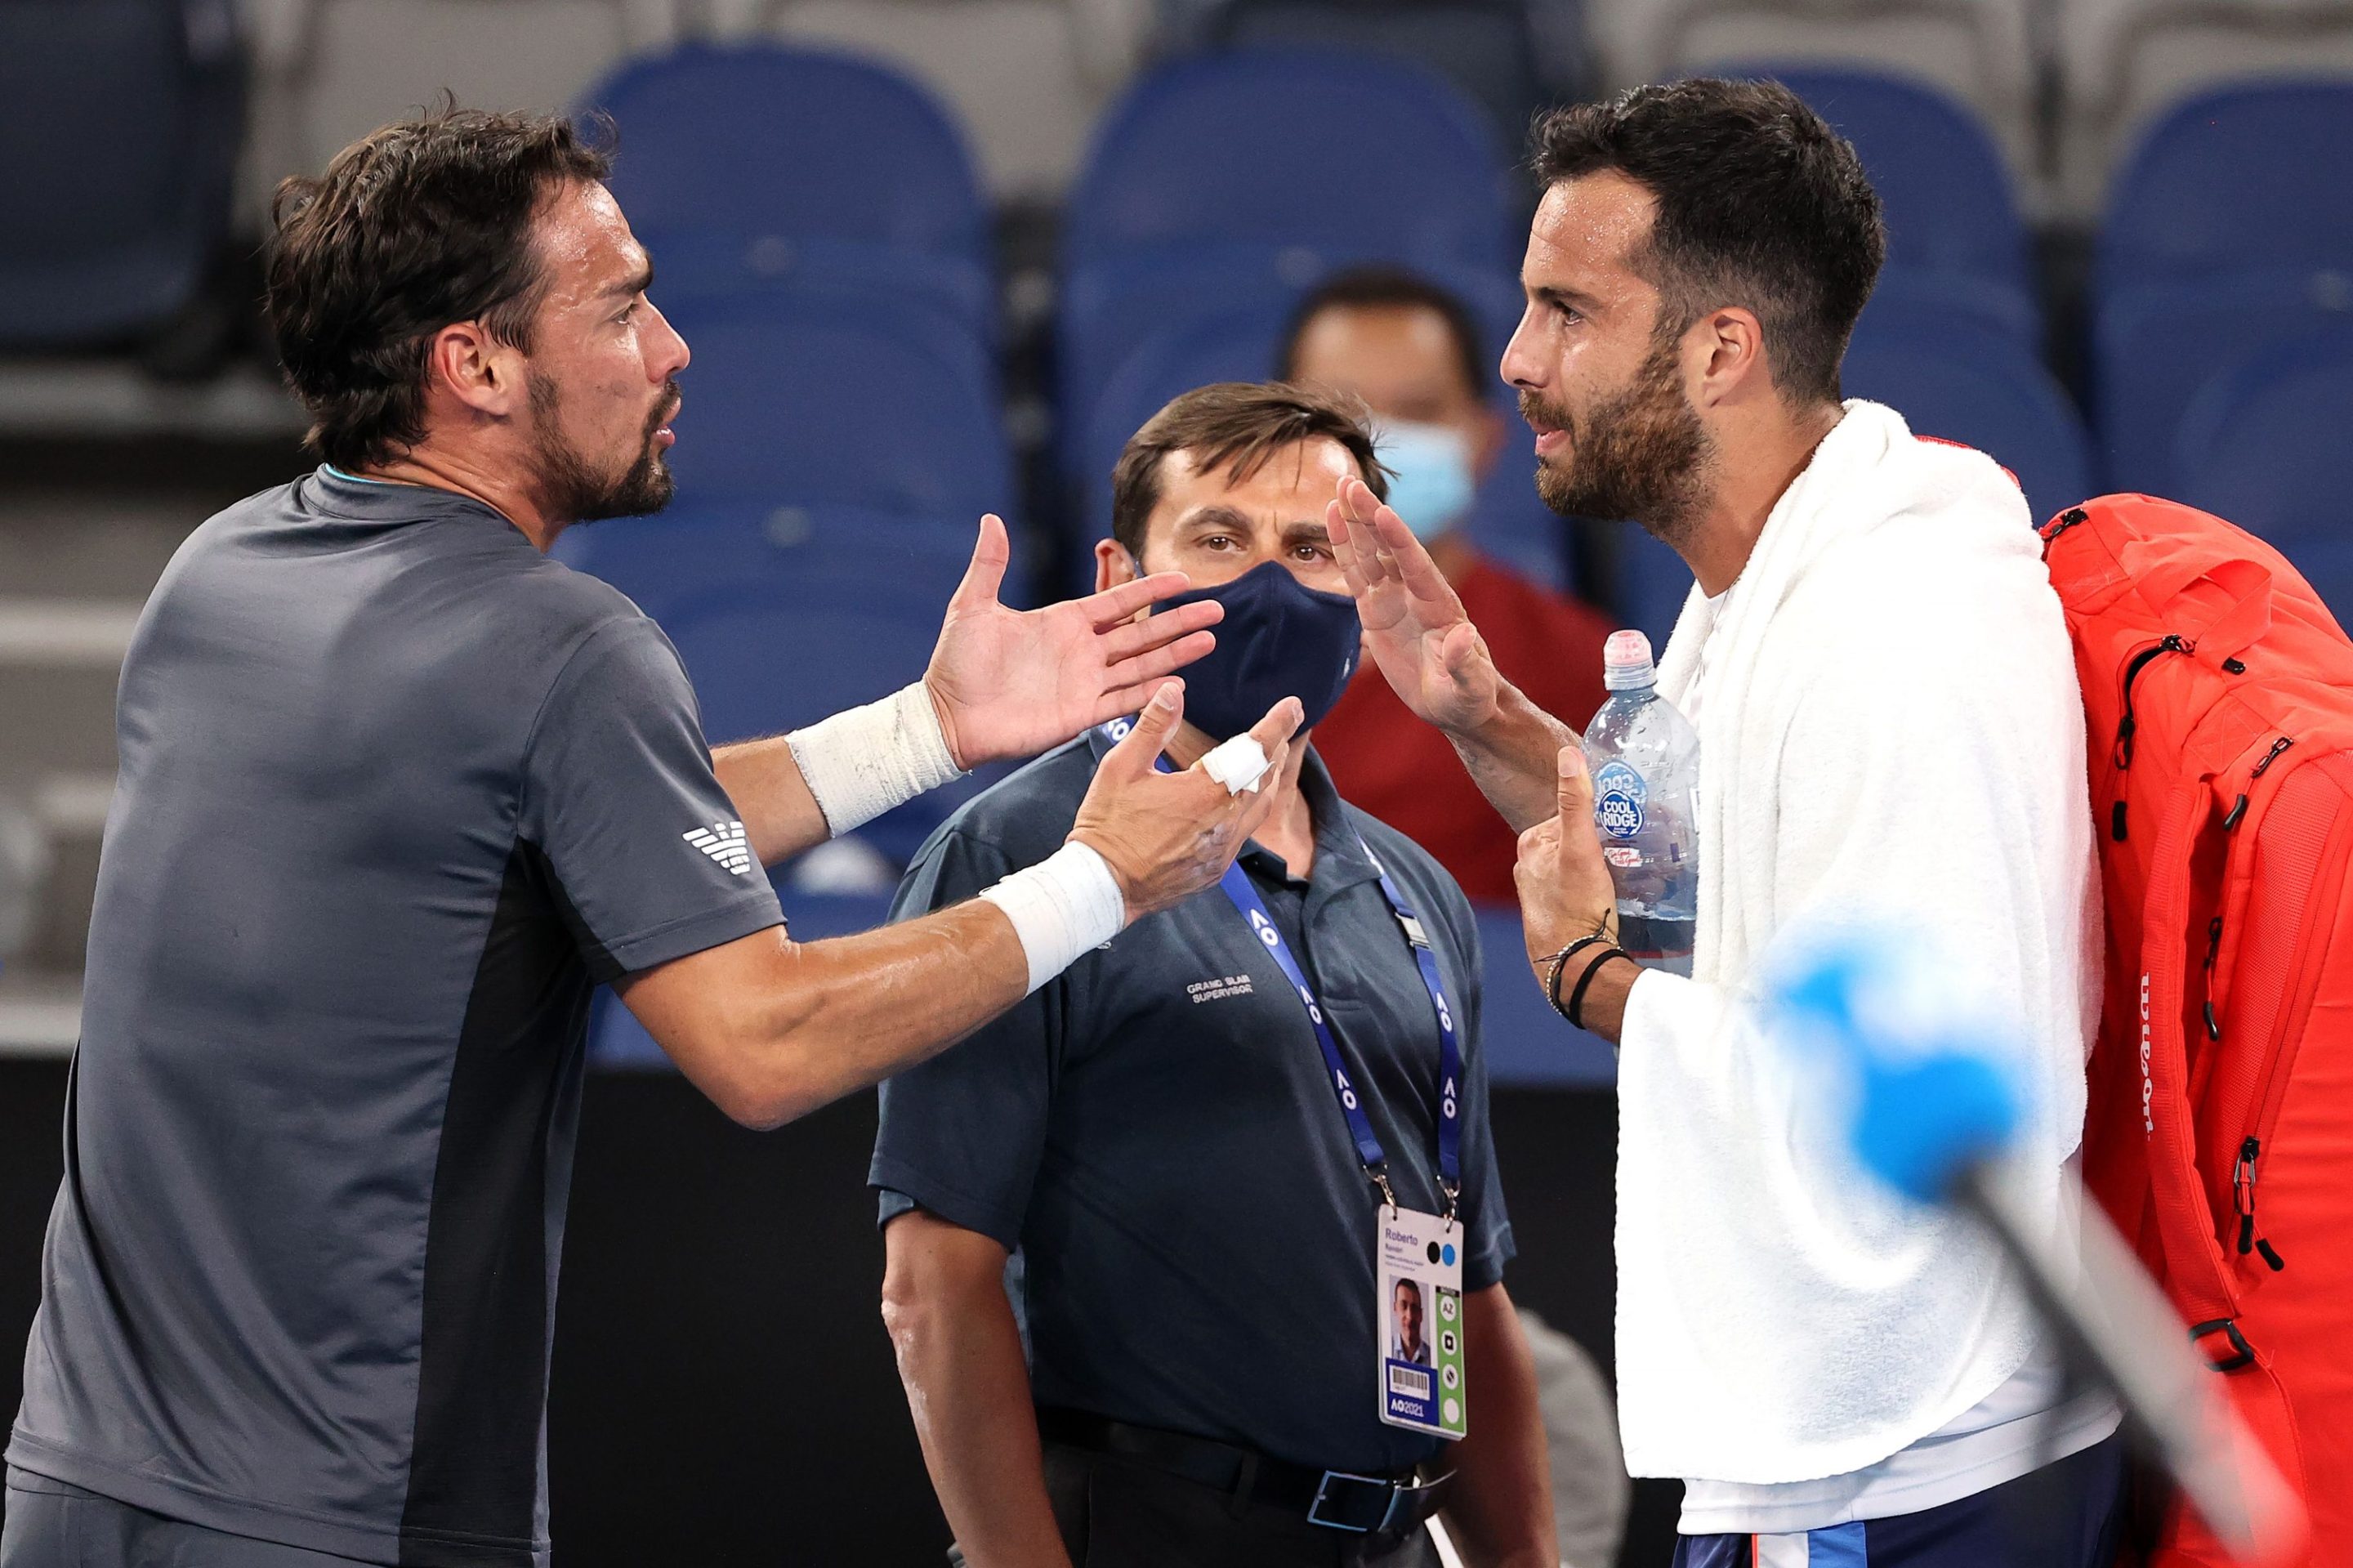 Fabio Fognini and Salvatore Caruso argue after their Australian Open match.